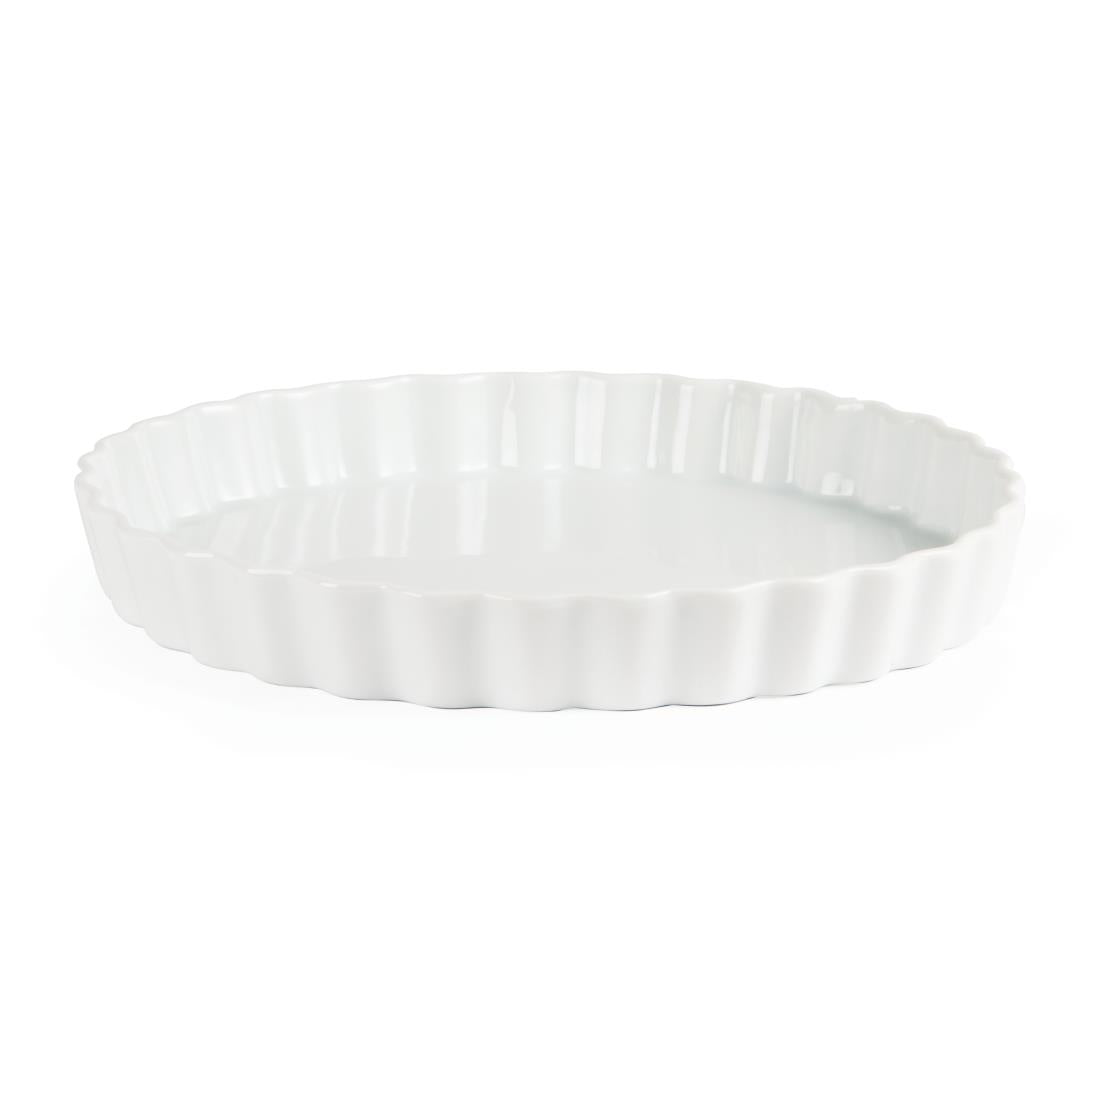 W416 Olympia Whiteware Flan Dishes 297mm (Pack of 6)